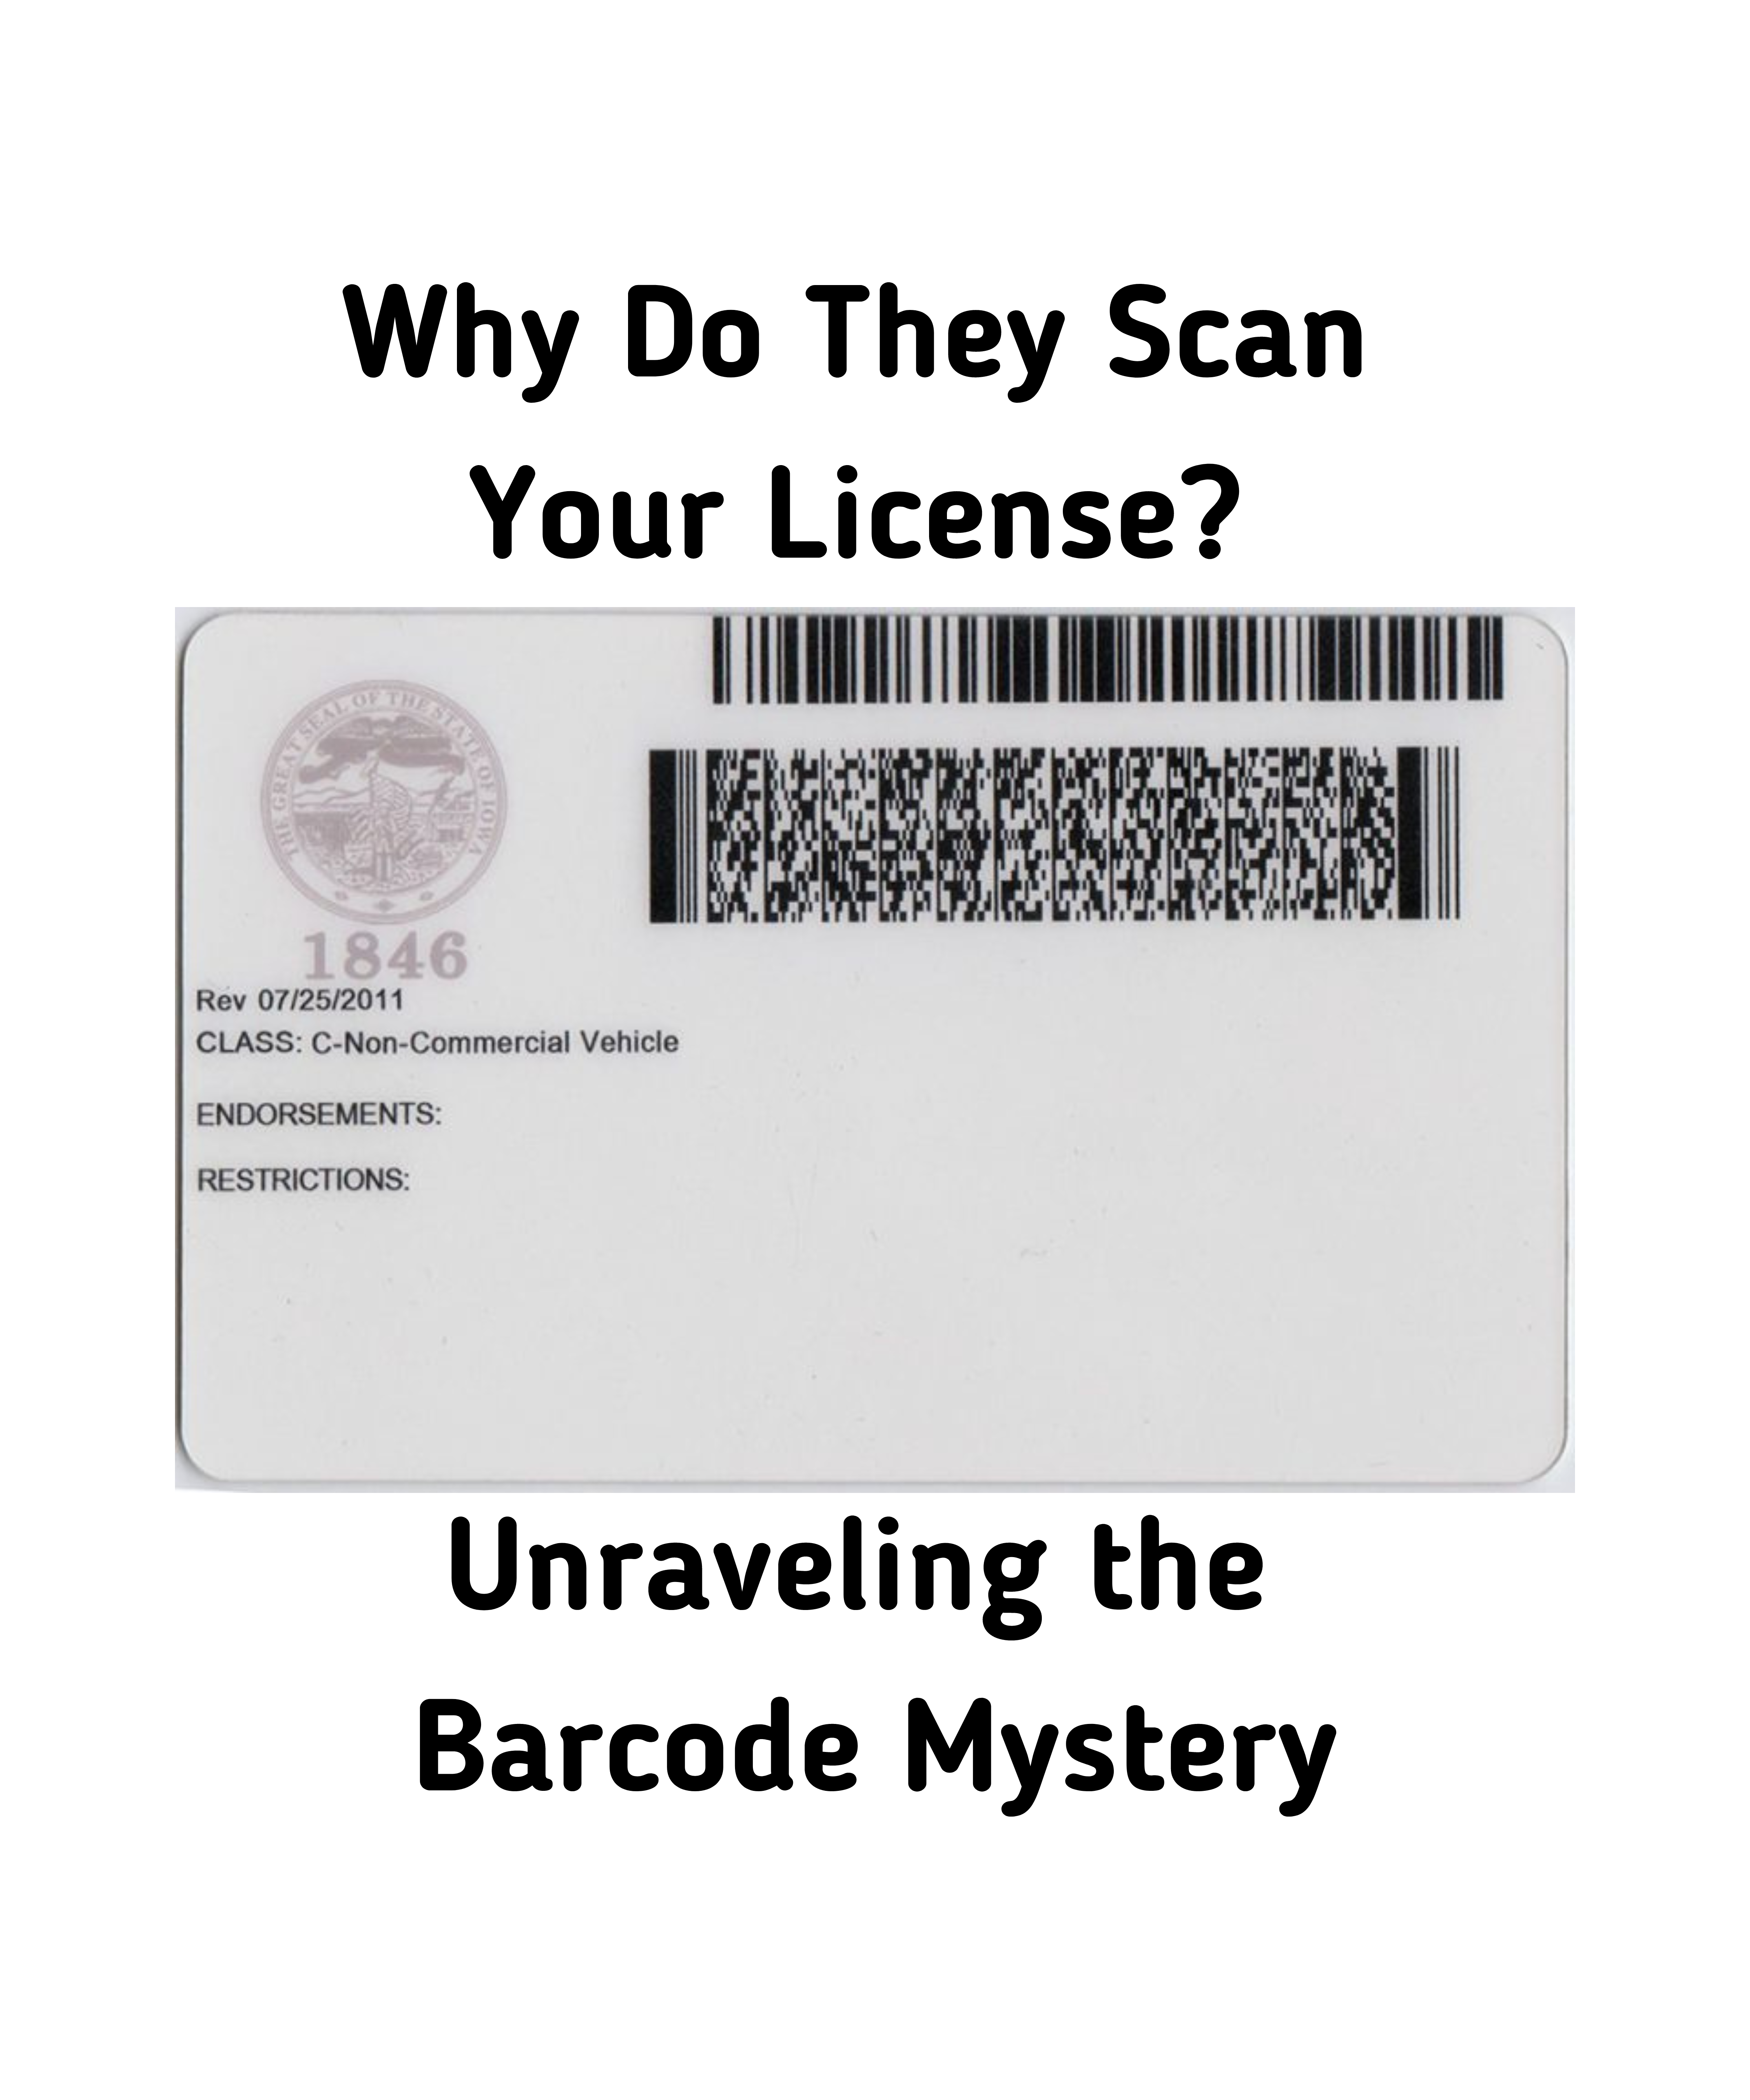 Why Do They Scan Your License